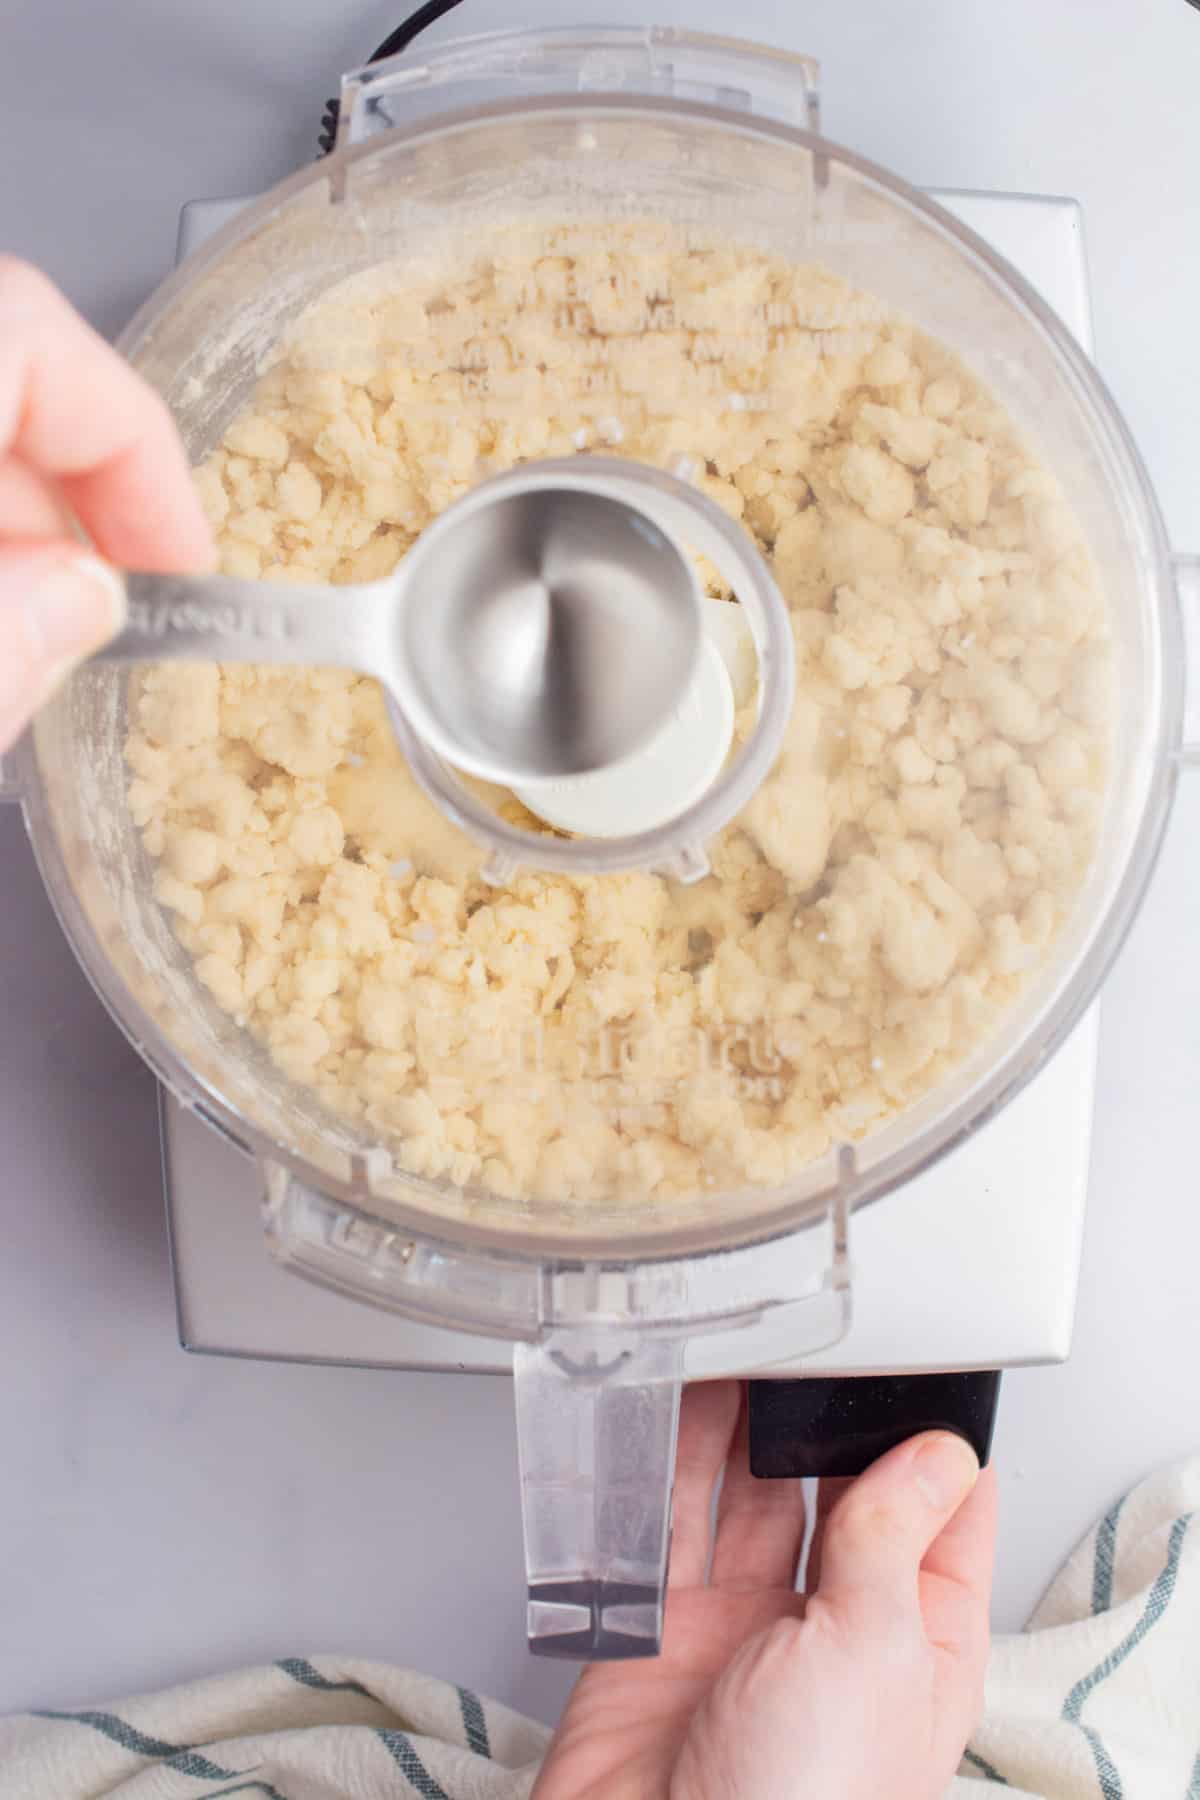 A tablespoon of water being poured into a food processor to make pie crust.